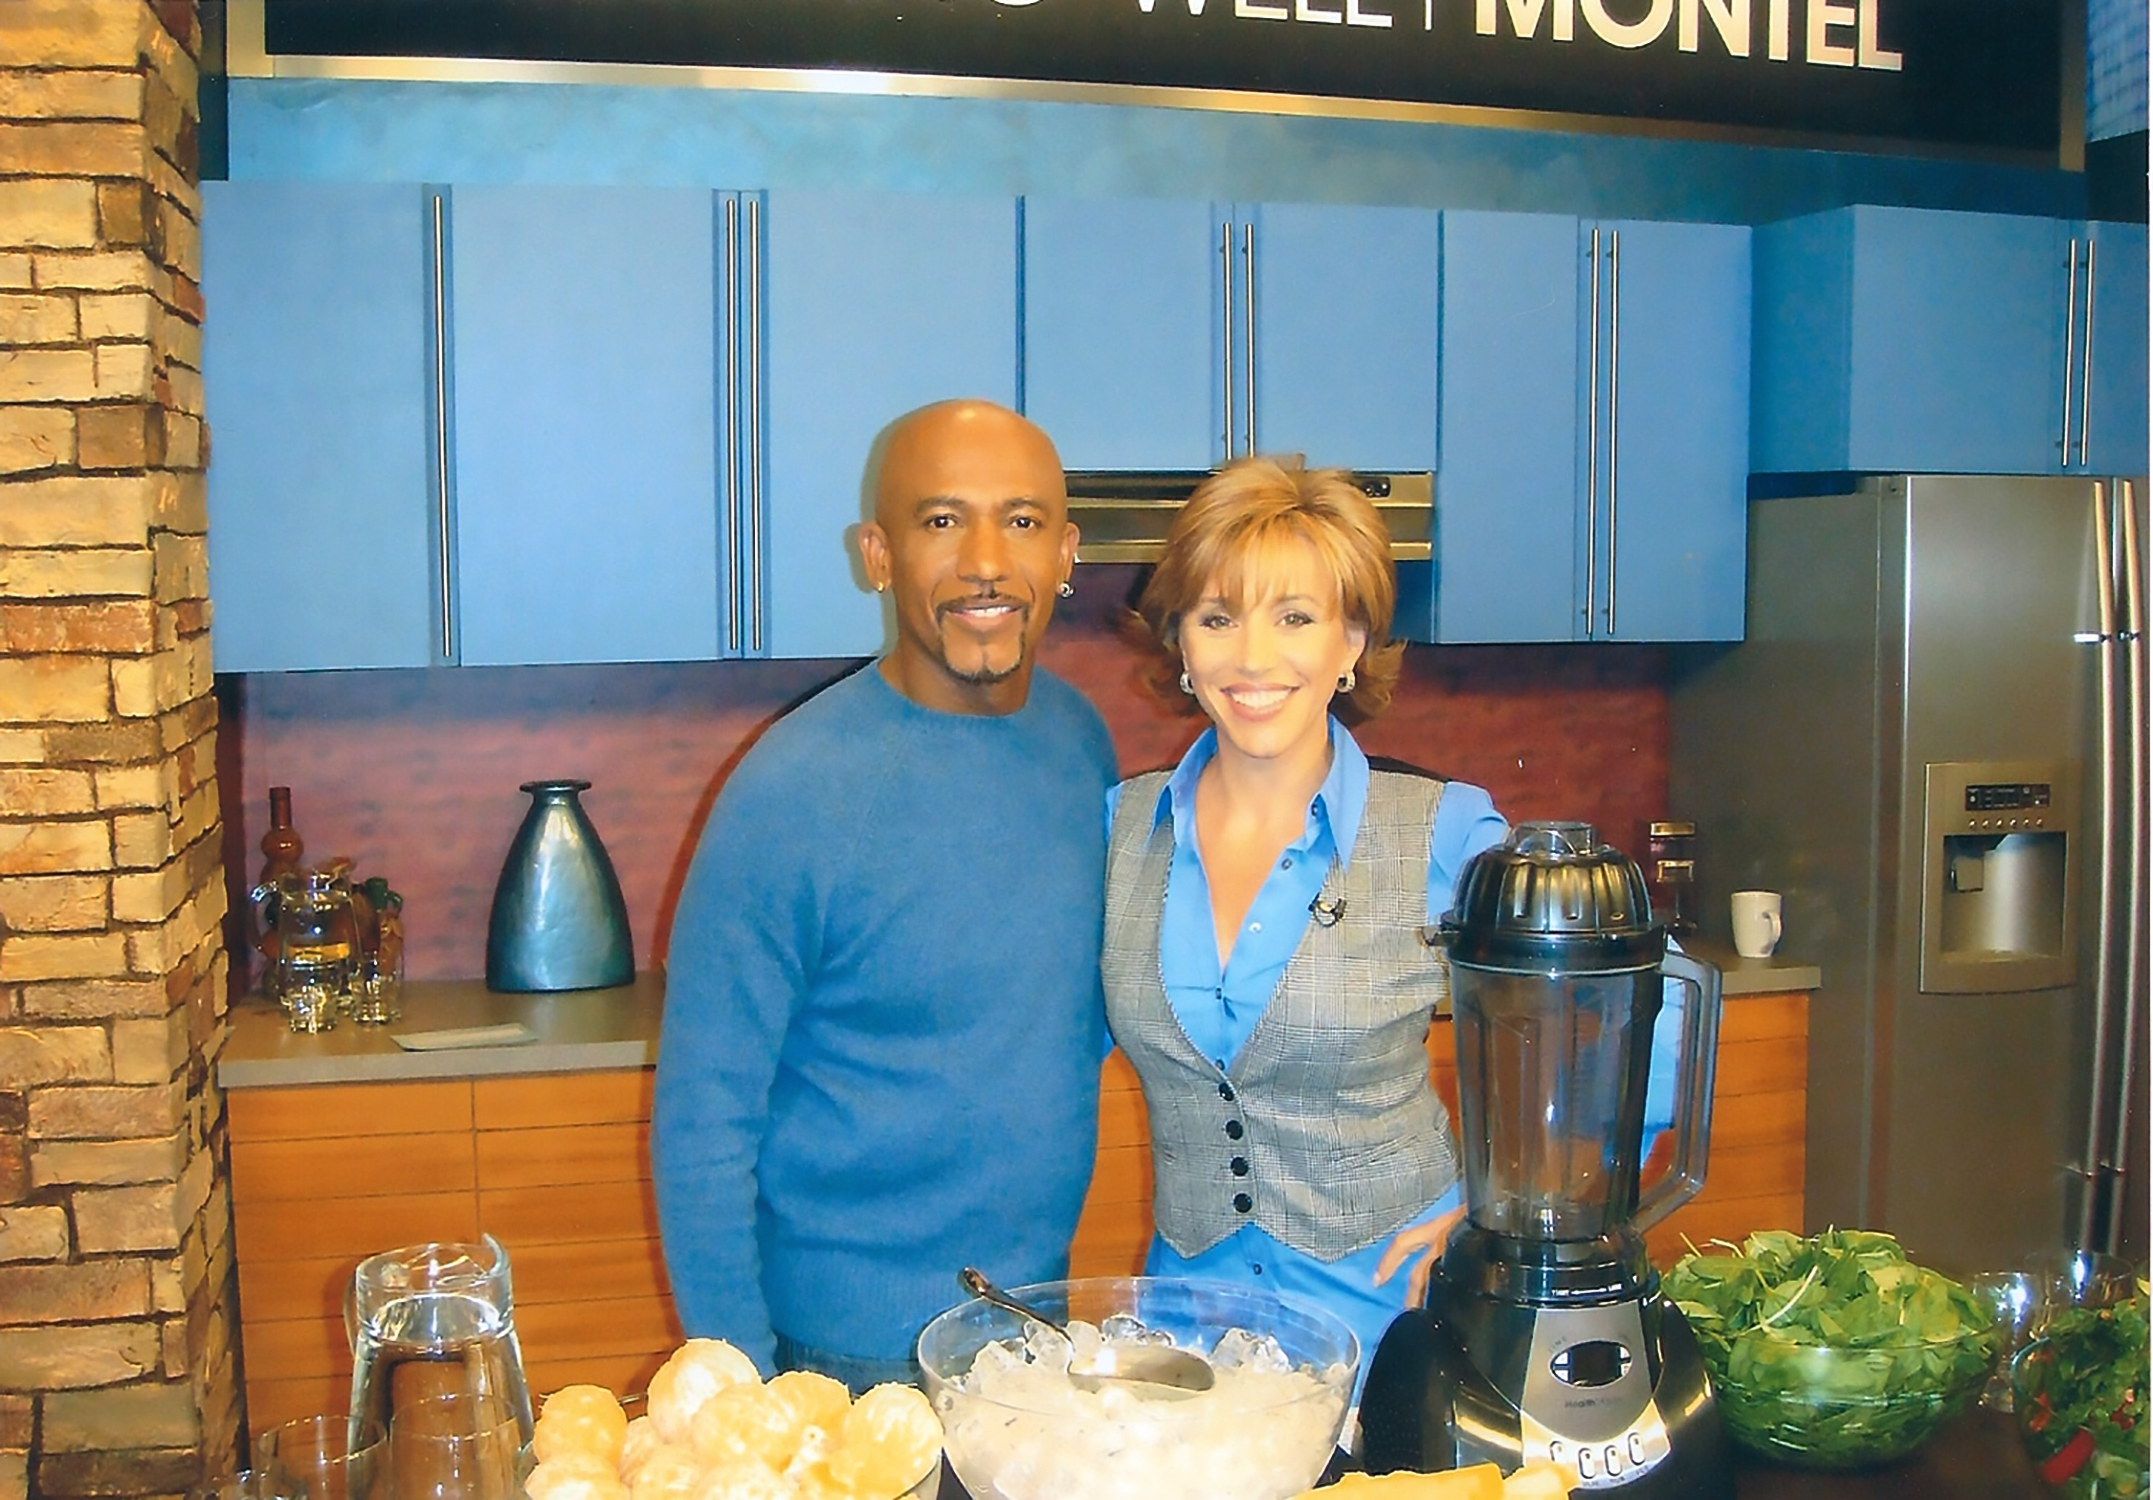 Montel Williams Forbes Riley infomercial